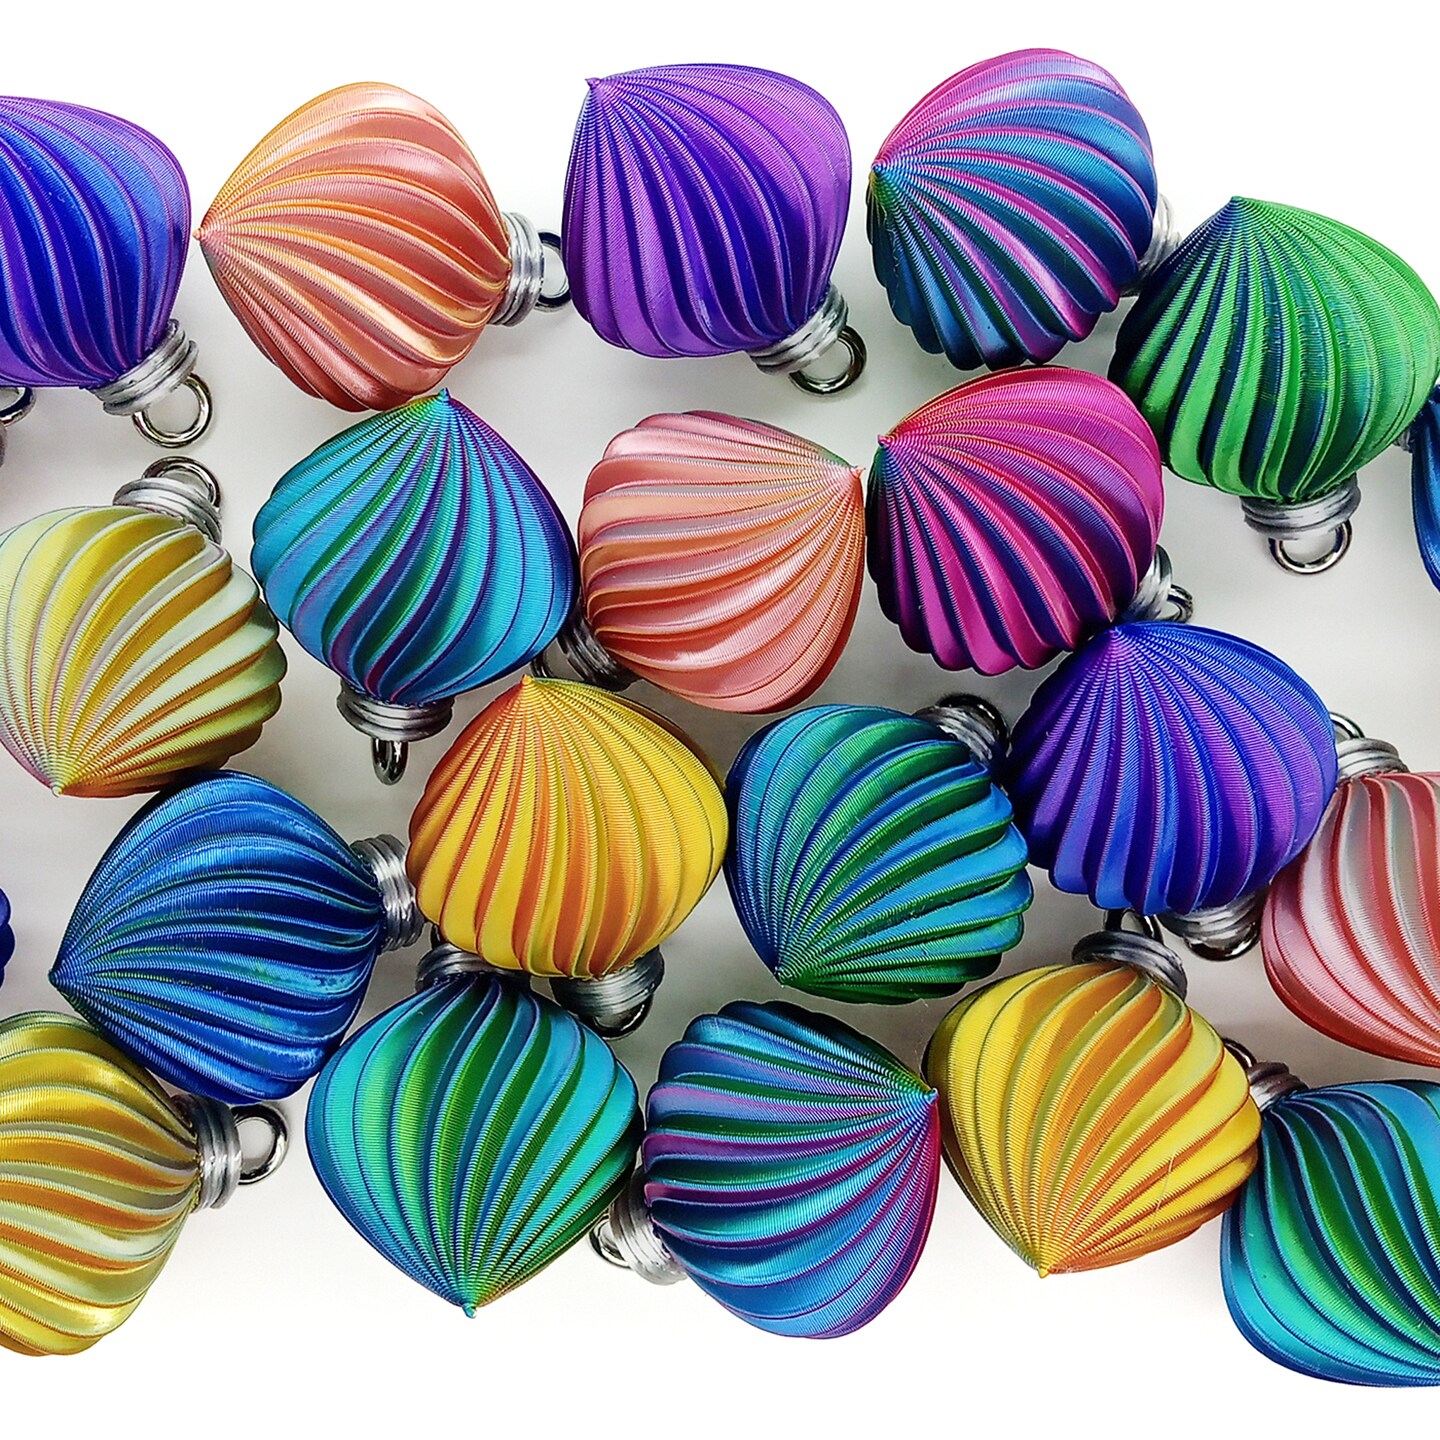 20 Multicolor Small Ornaments for Miniature Christmas Trees, Mixed Colors, about 1 inch tall, Adorabilities